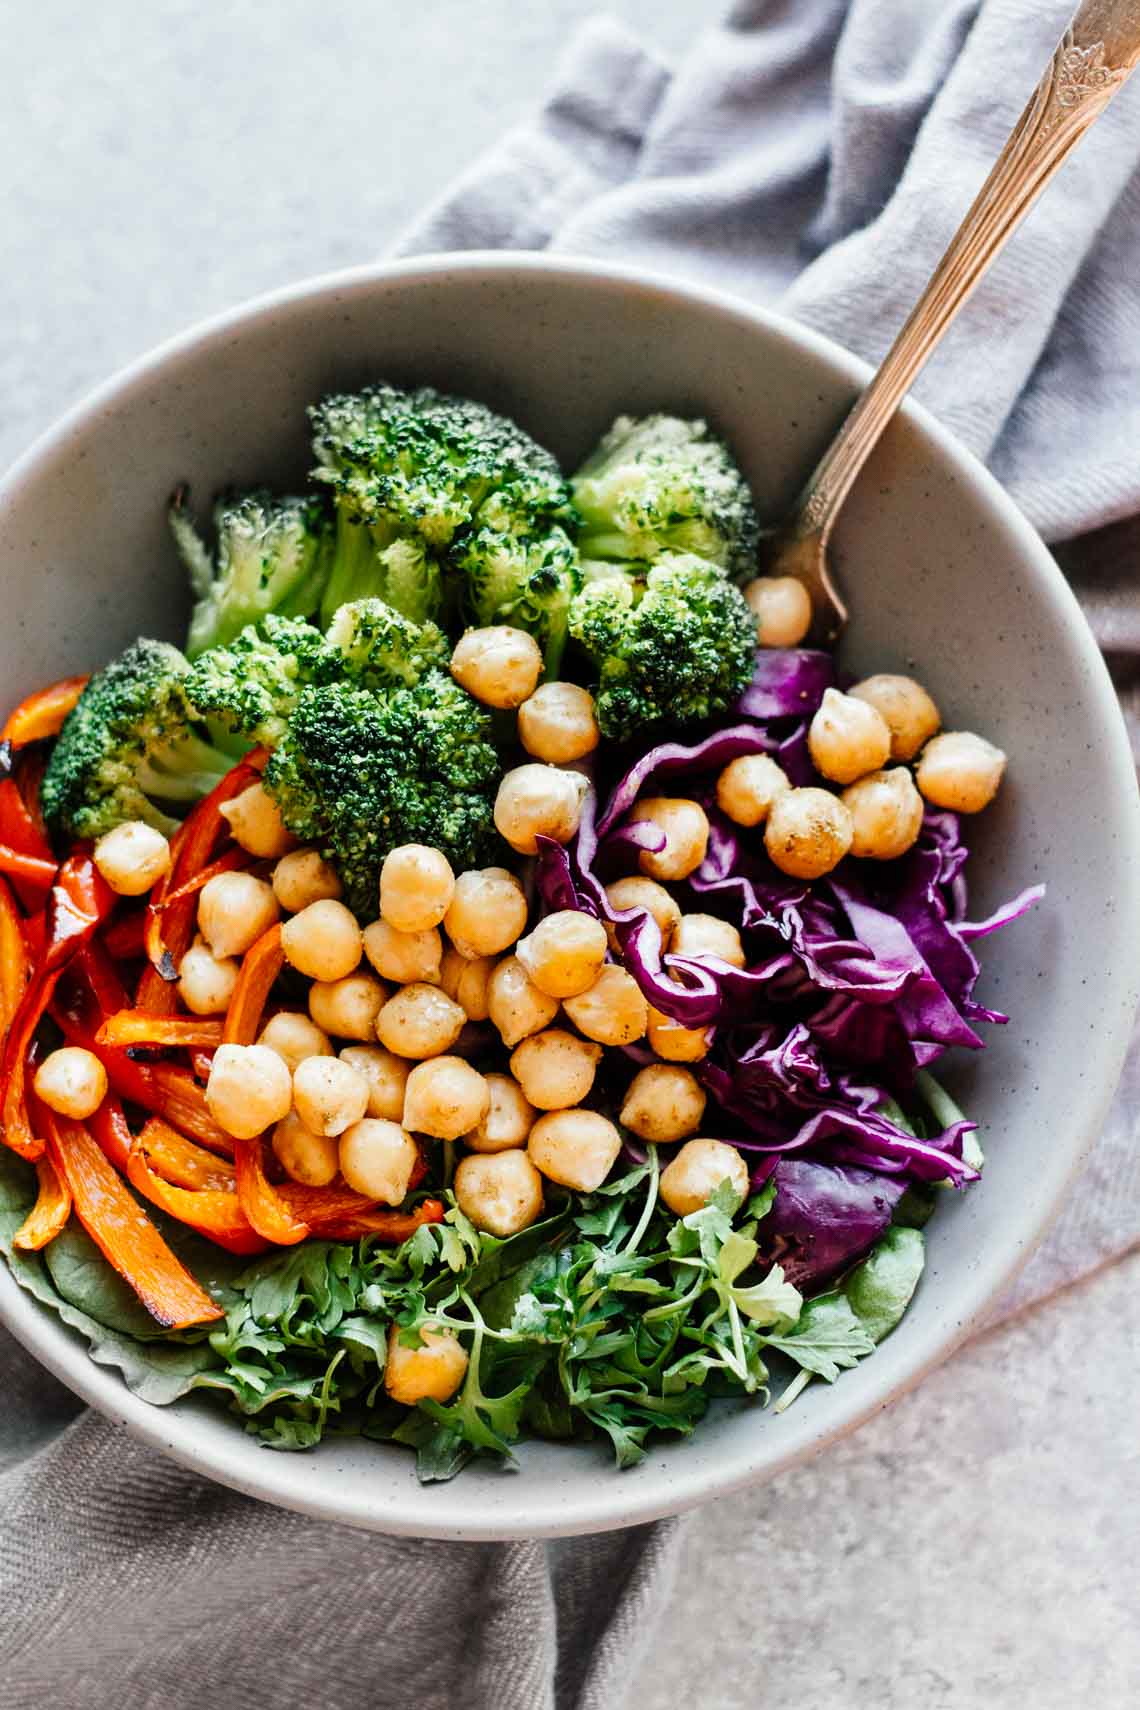 Need new healthy lunch ideas? Try our DIY power bowl recipes